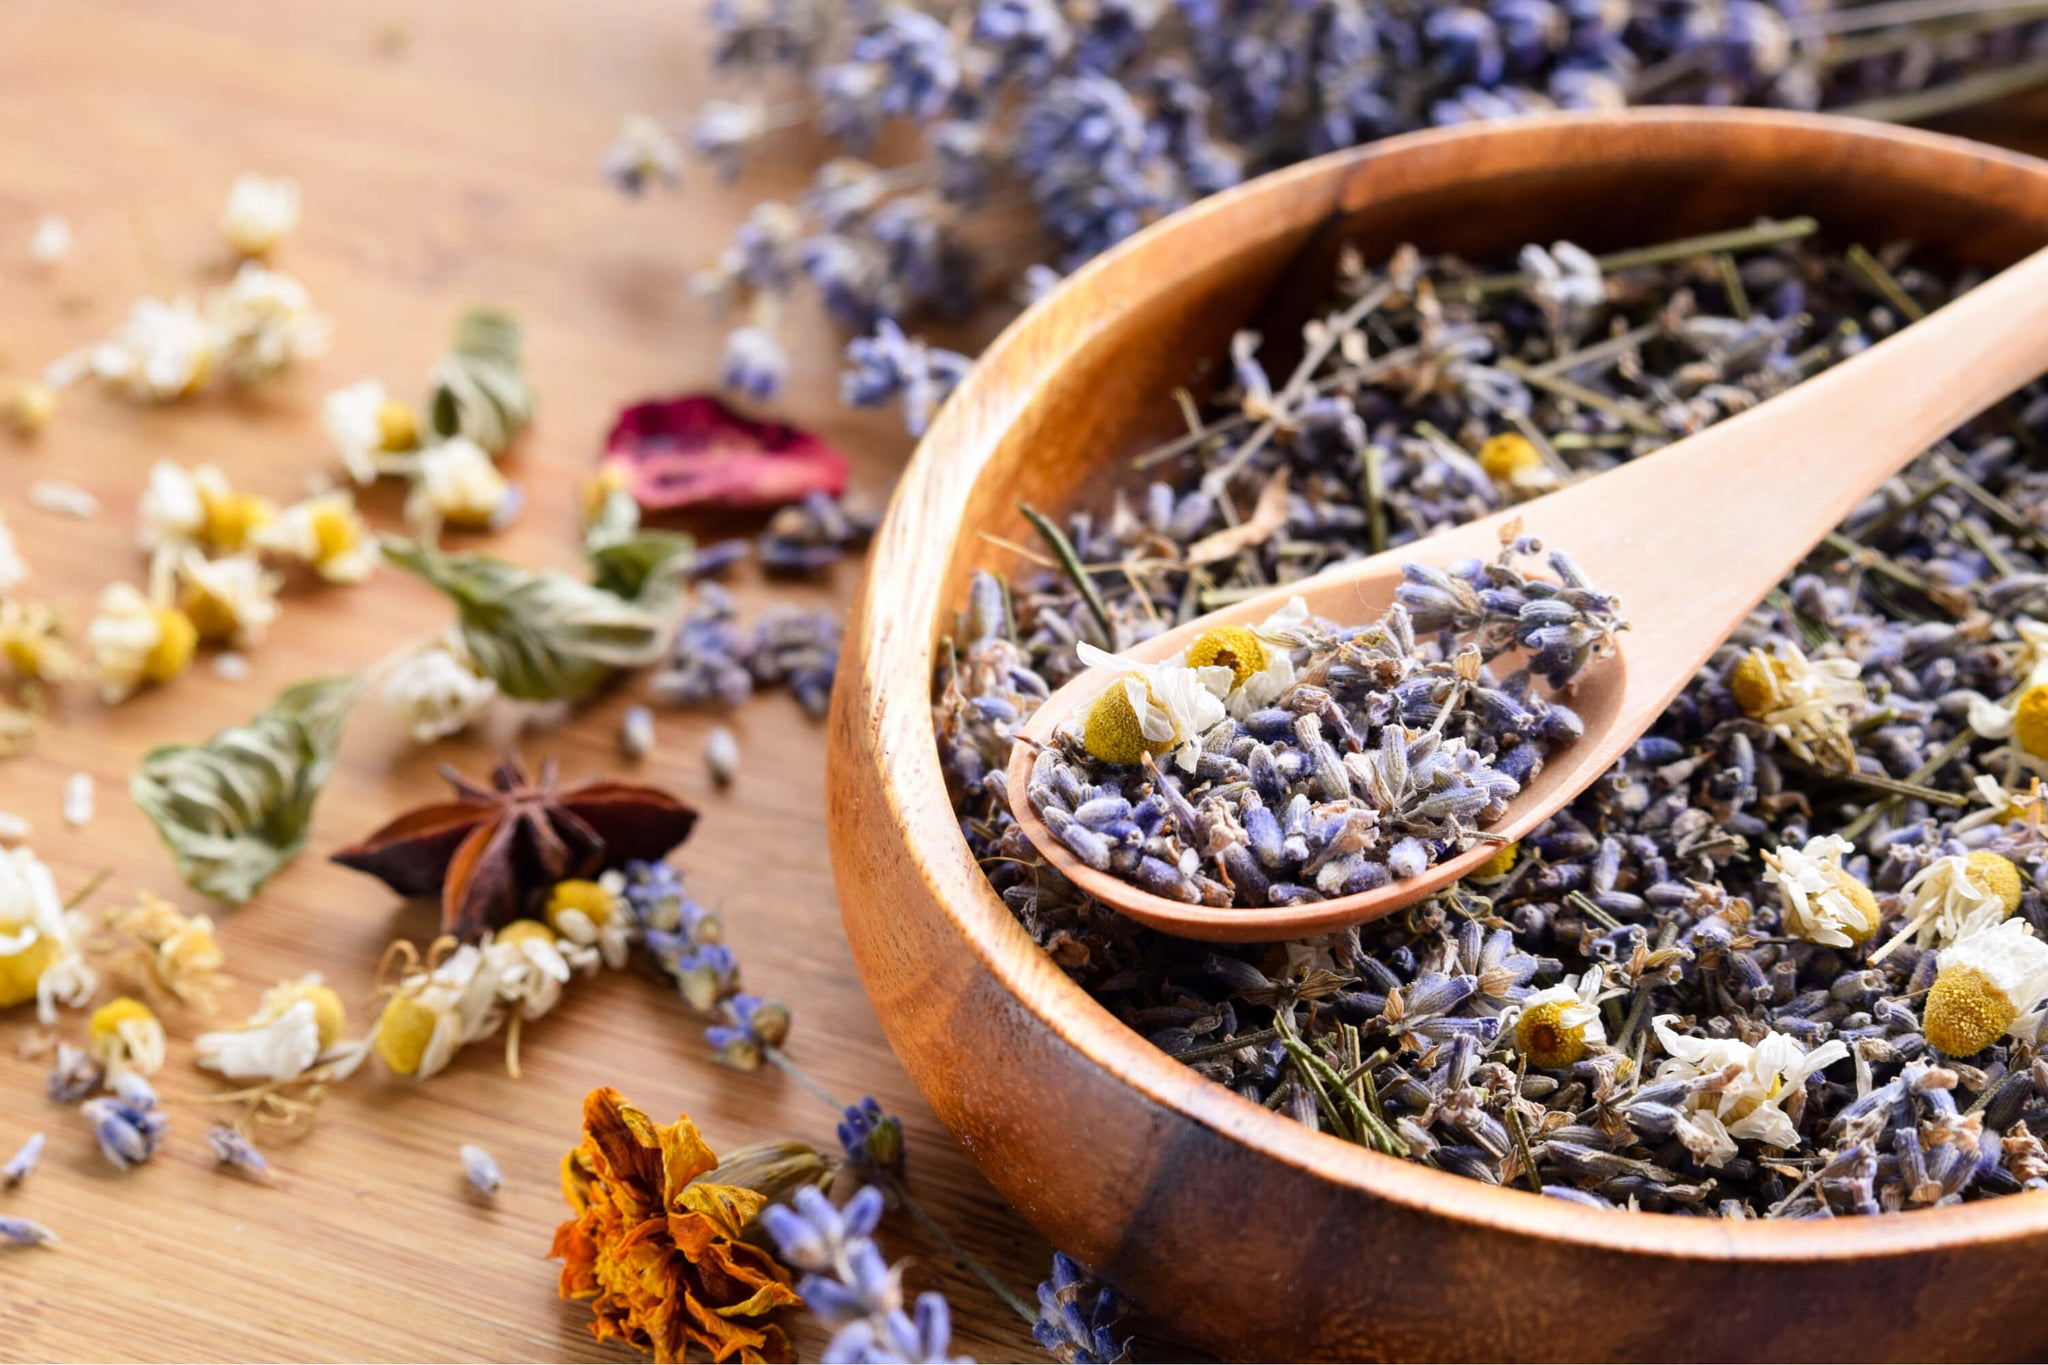 The history of herbalism has a rich tradition that is worth reading. 